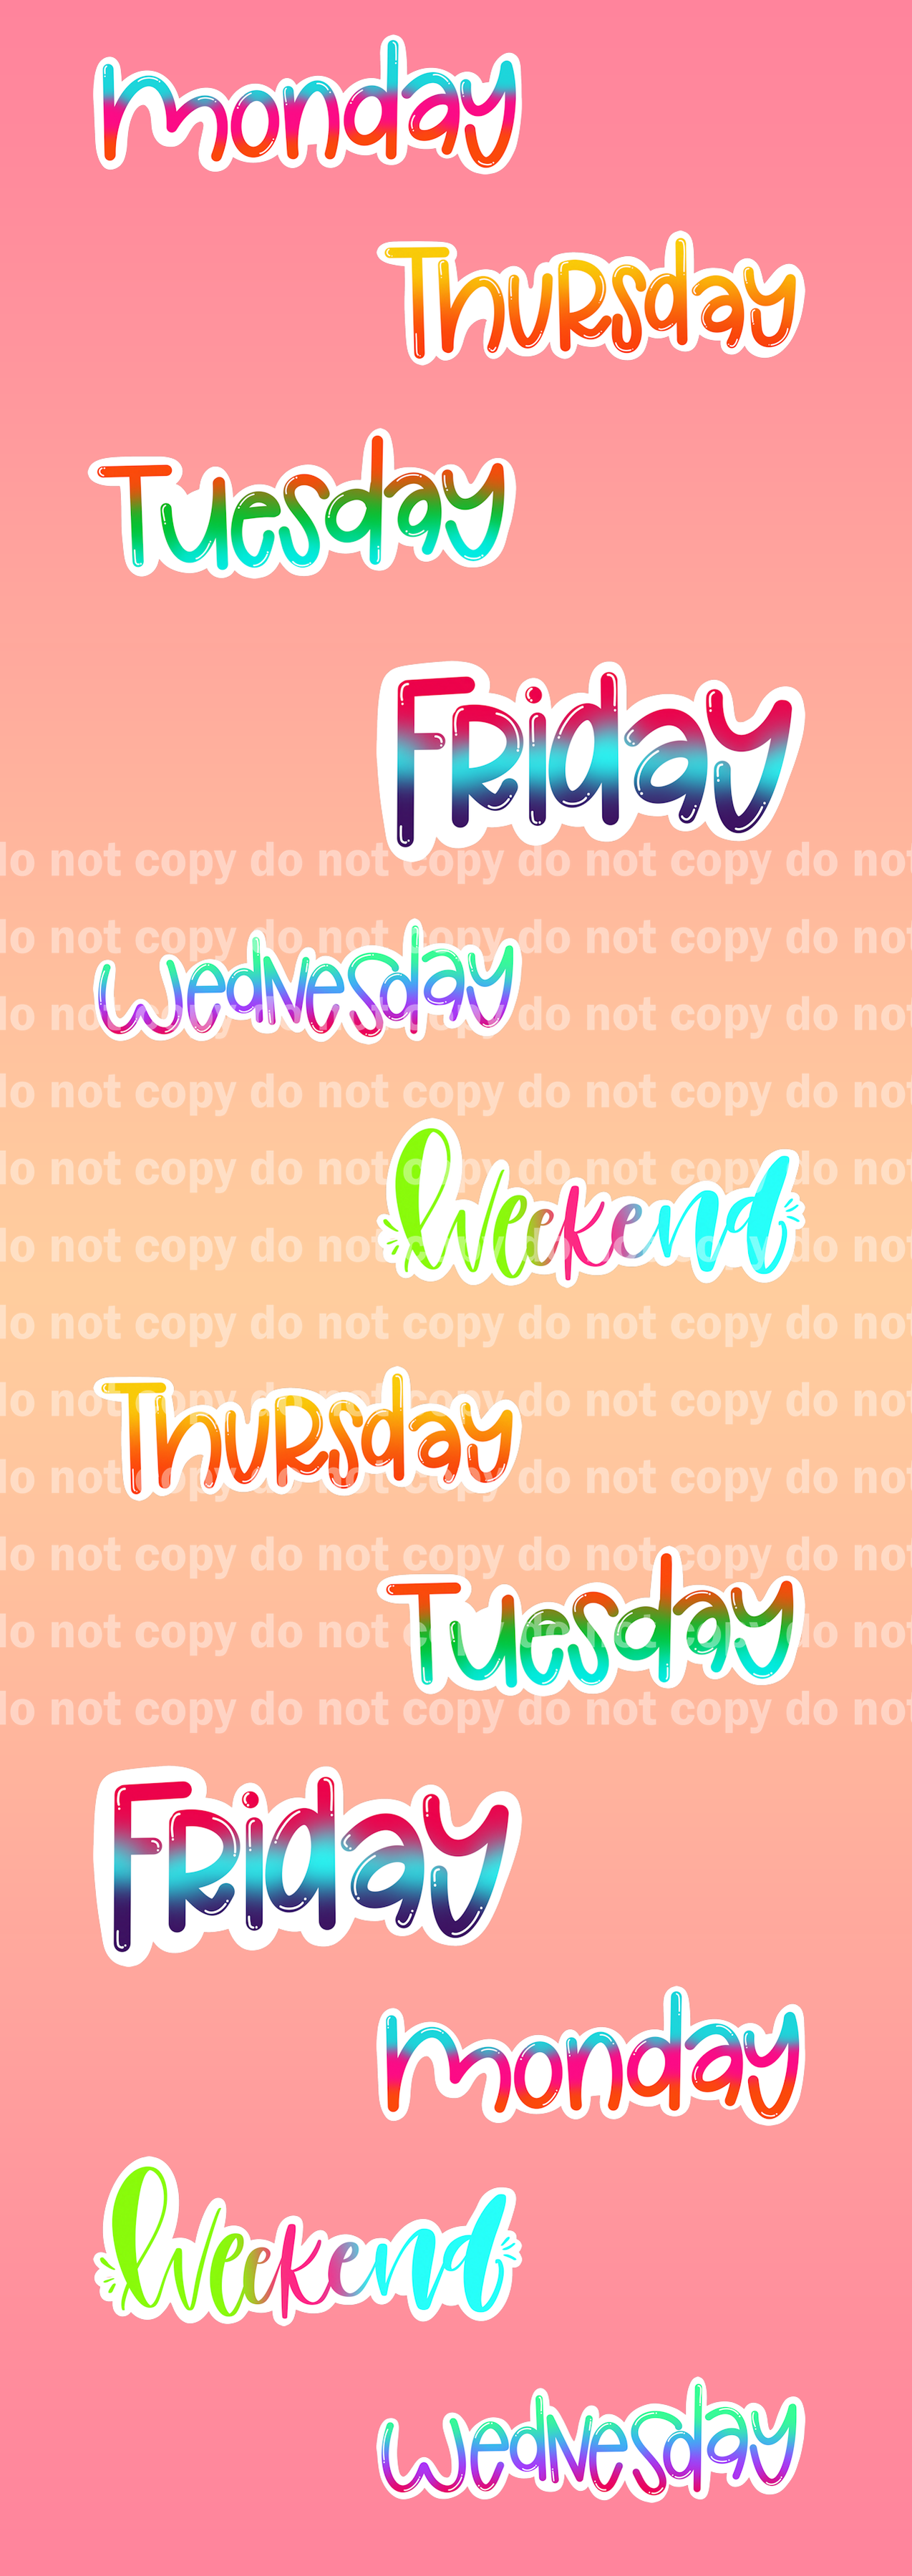 Days Of The Week Sticker Set - 12 Glossy Stickers per sheet